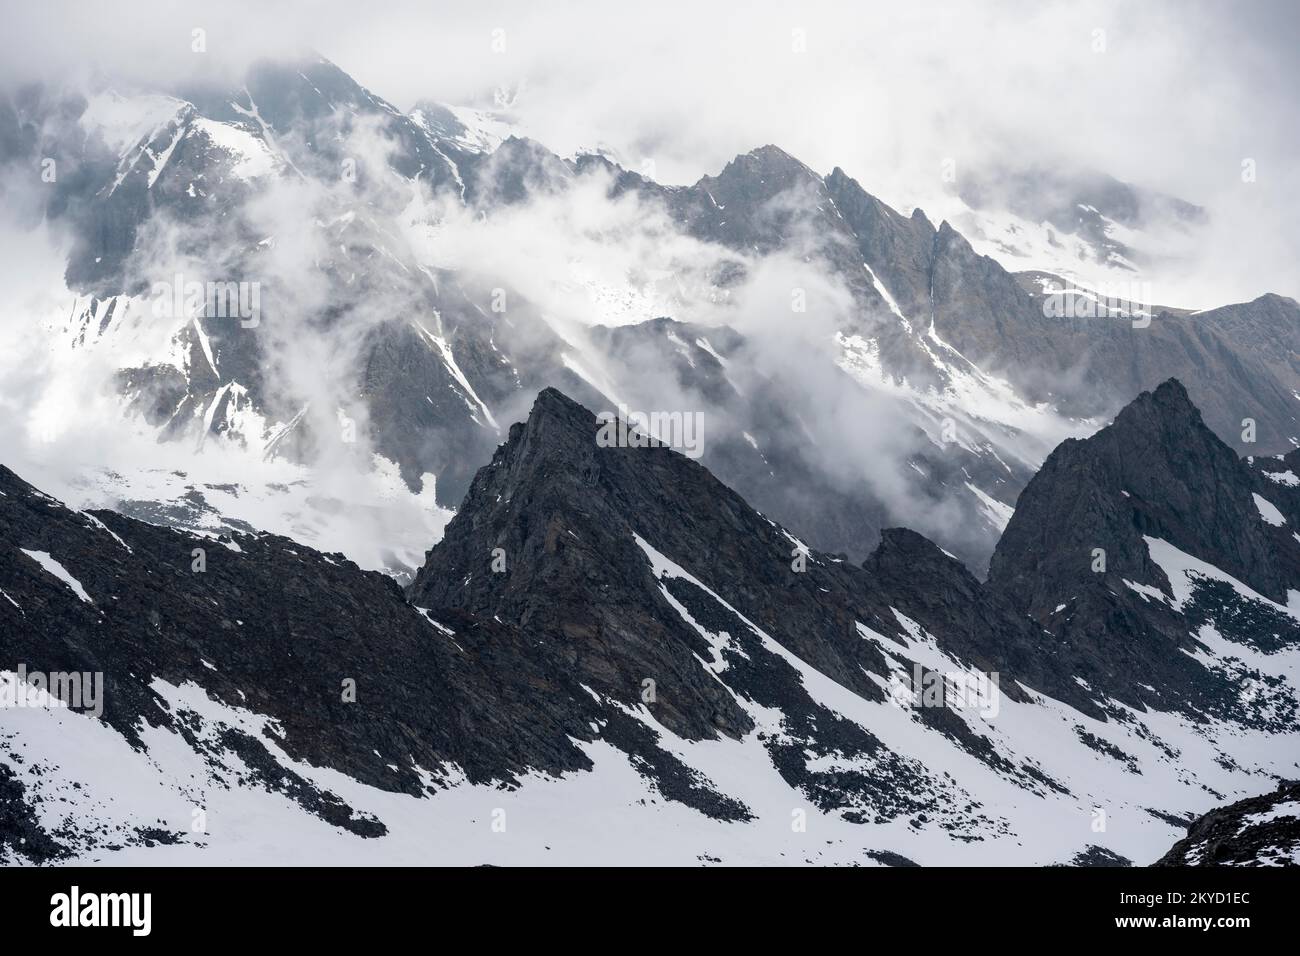 Mountains in winter with clouds and fog, Neustift im Stubai Valley, Tyrol, Austria Stock Photo